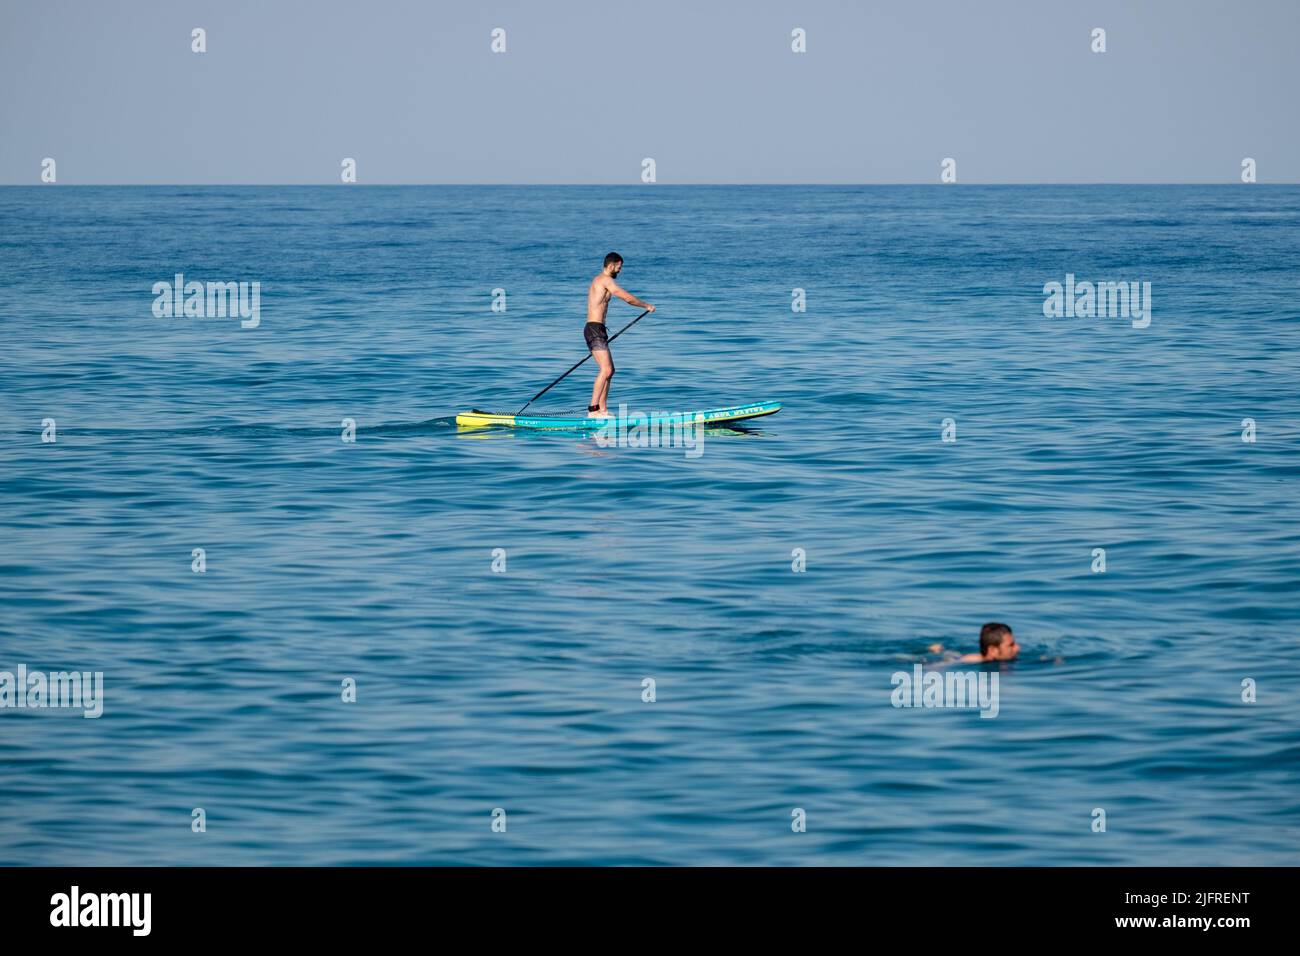 A young man on stand up paddleboard and another man swimming in the calm waters of Aegean sea Stock Photo